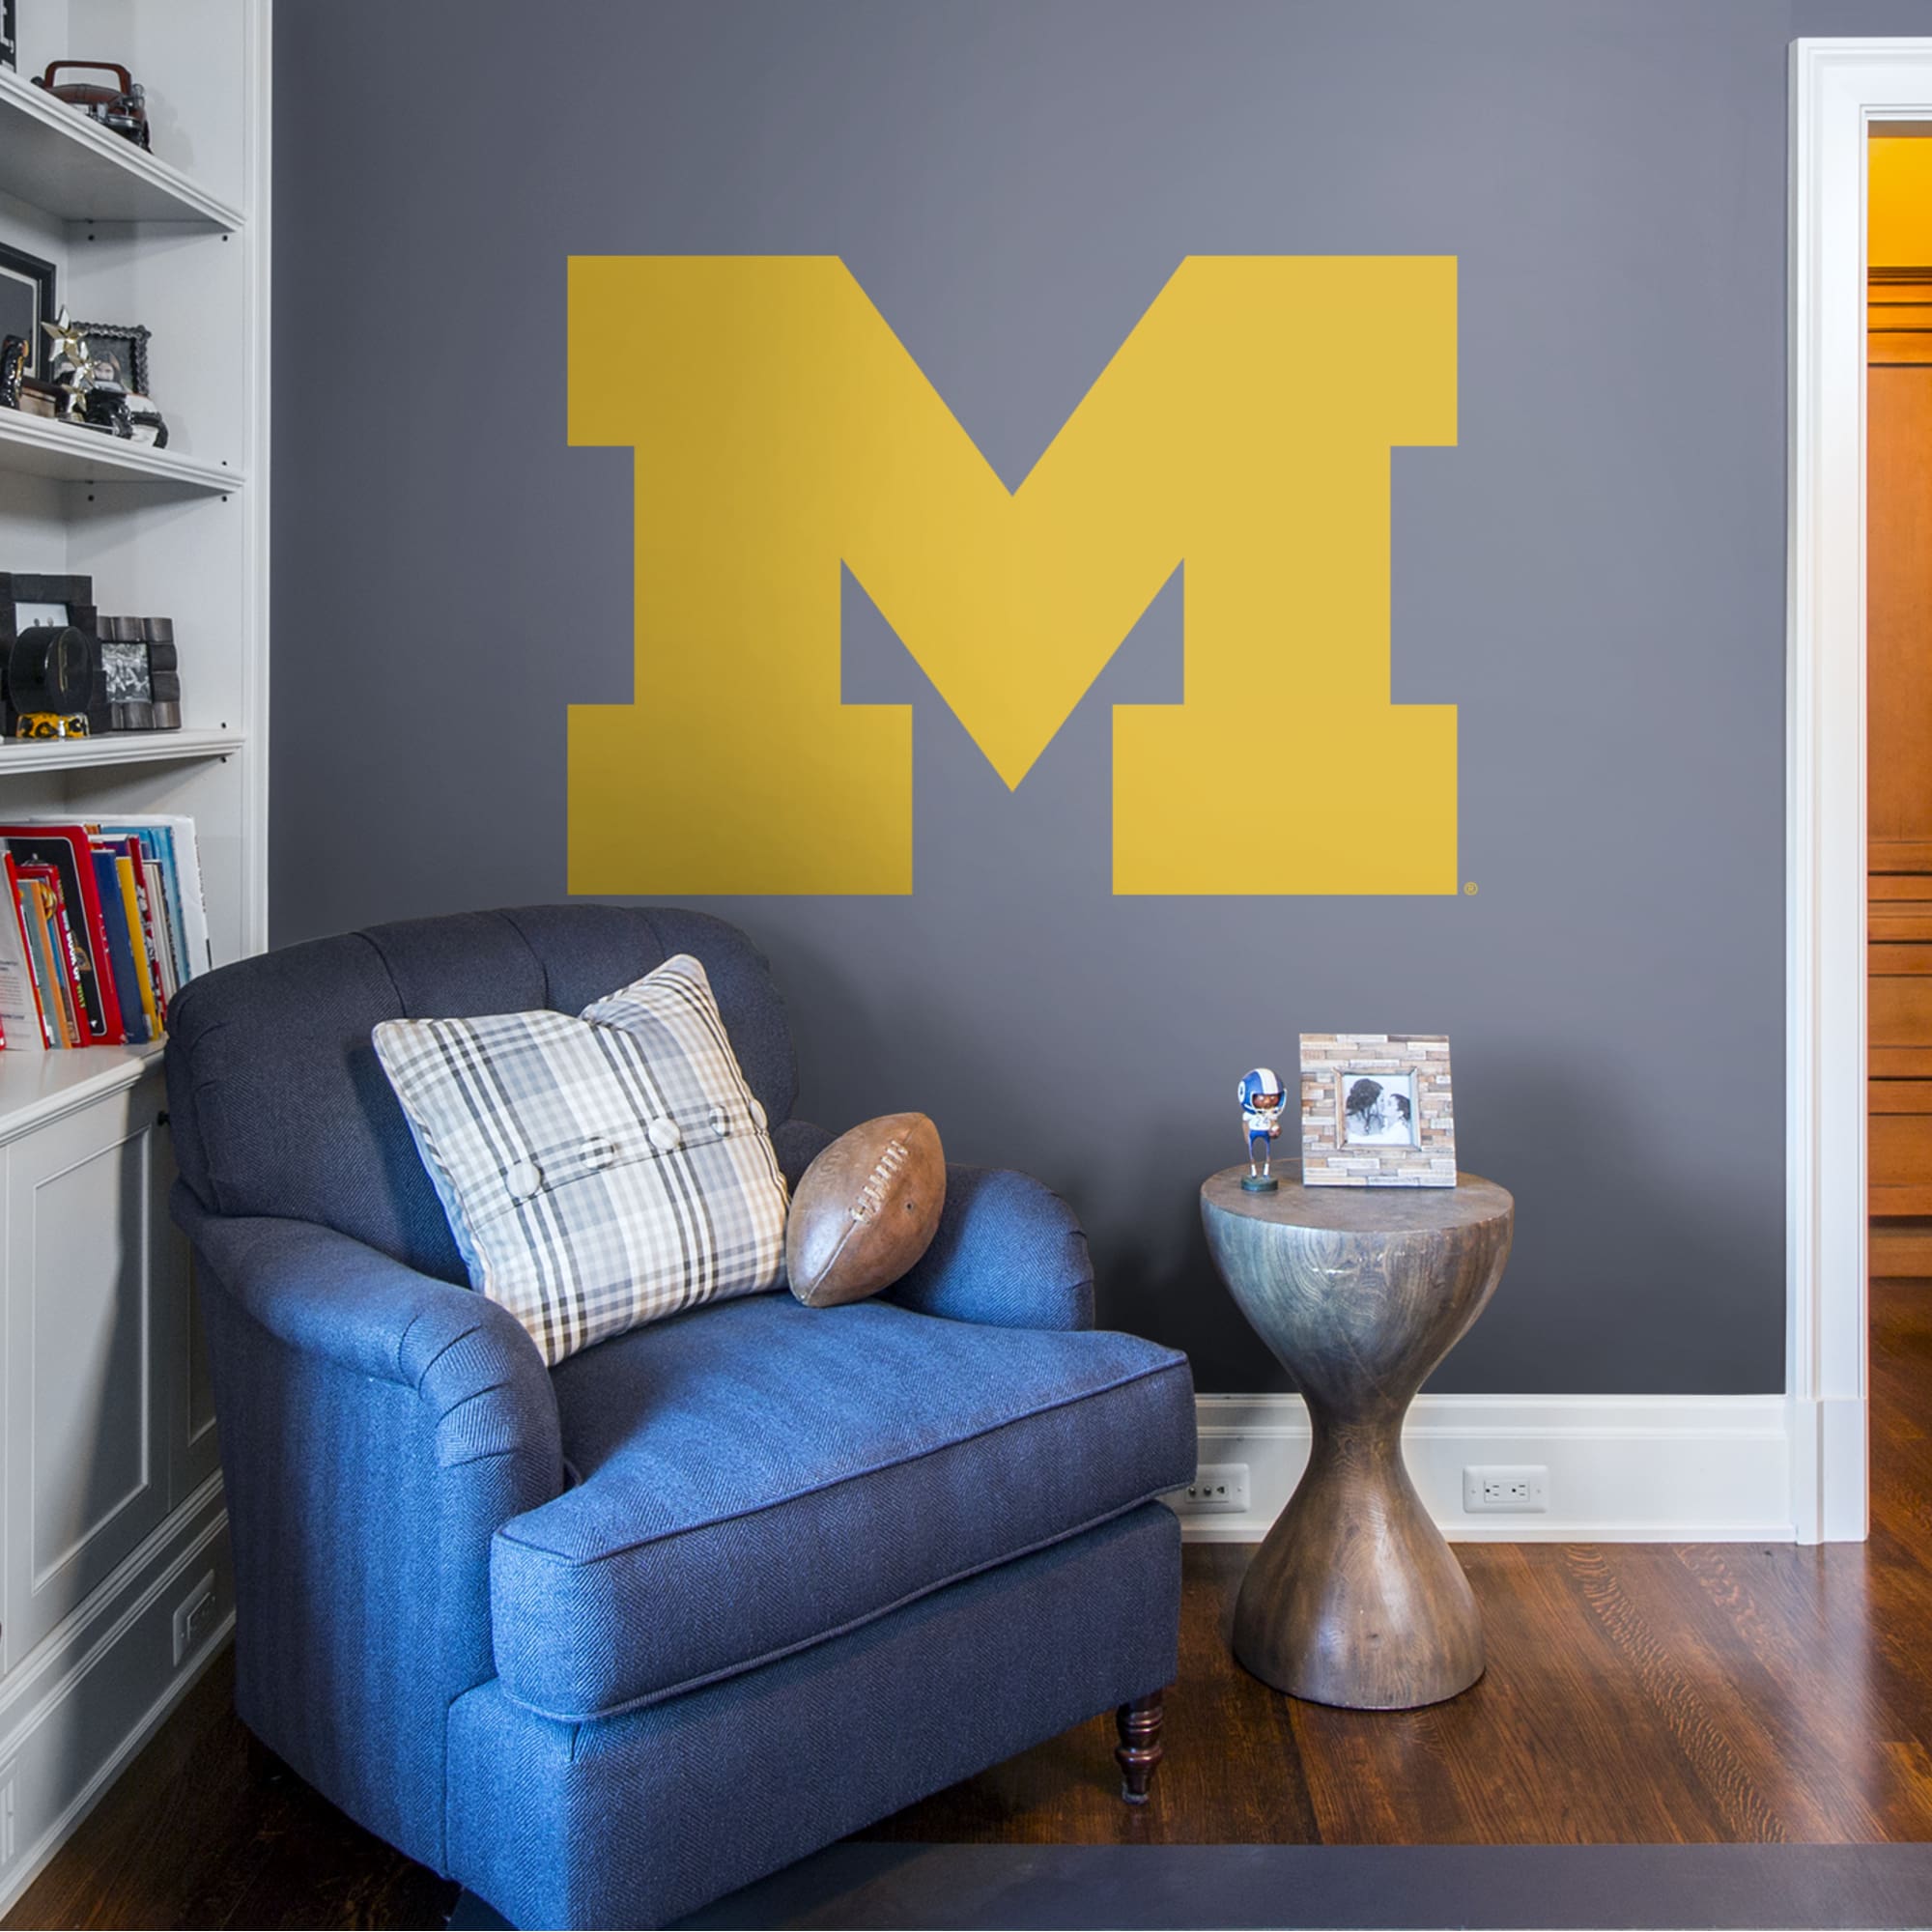 Michigan Wolverines: Block M Logo - Officially Licensed Removable Wall Decal 49.0"W x 35.0"H by Fathead | Vinyl